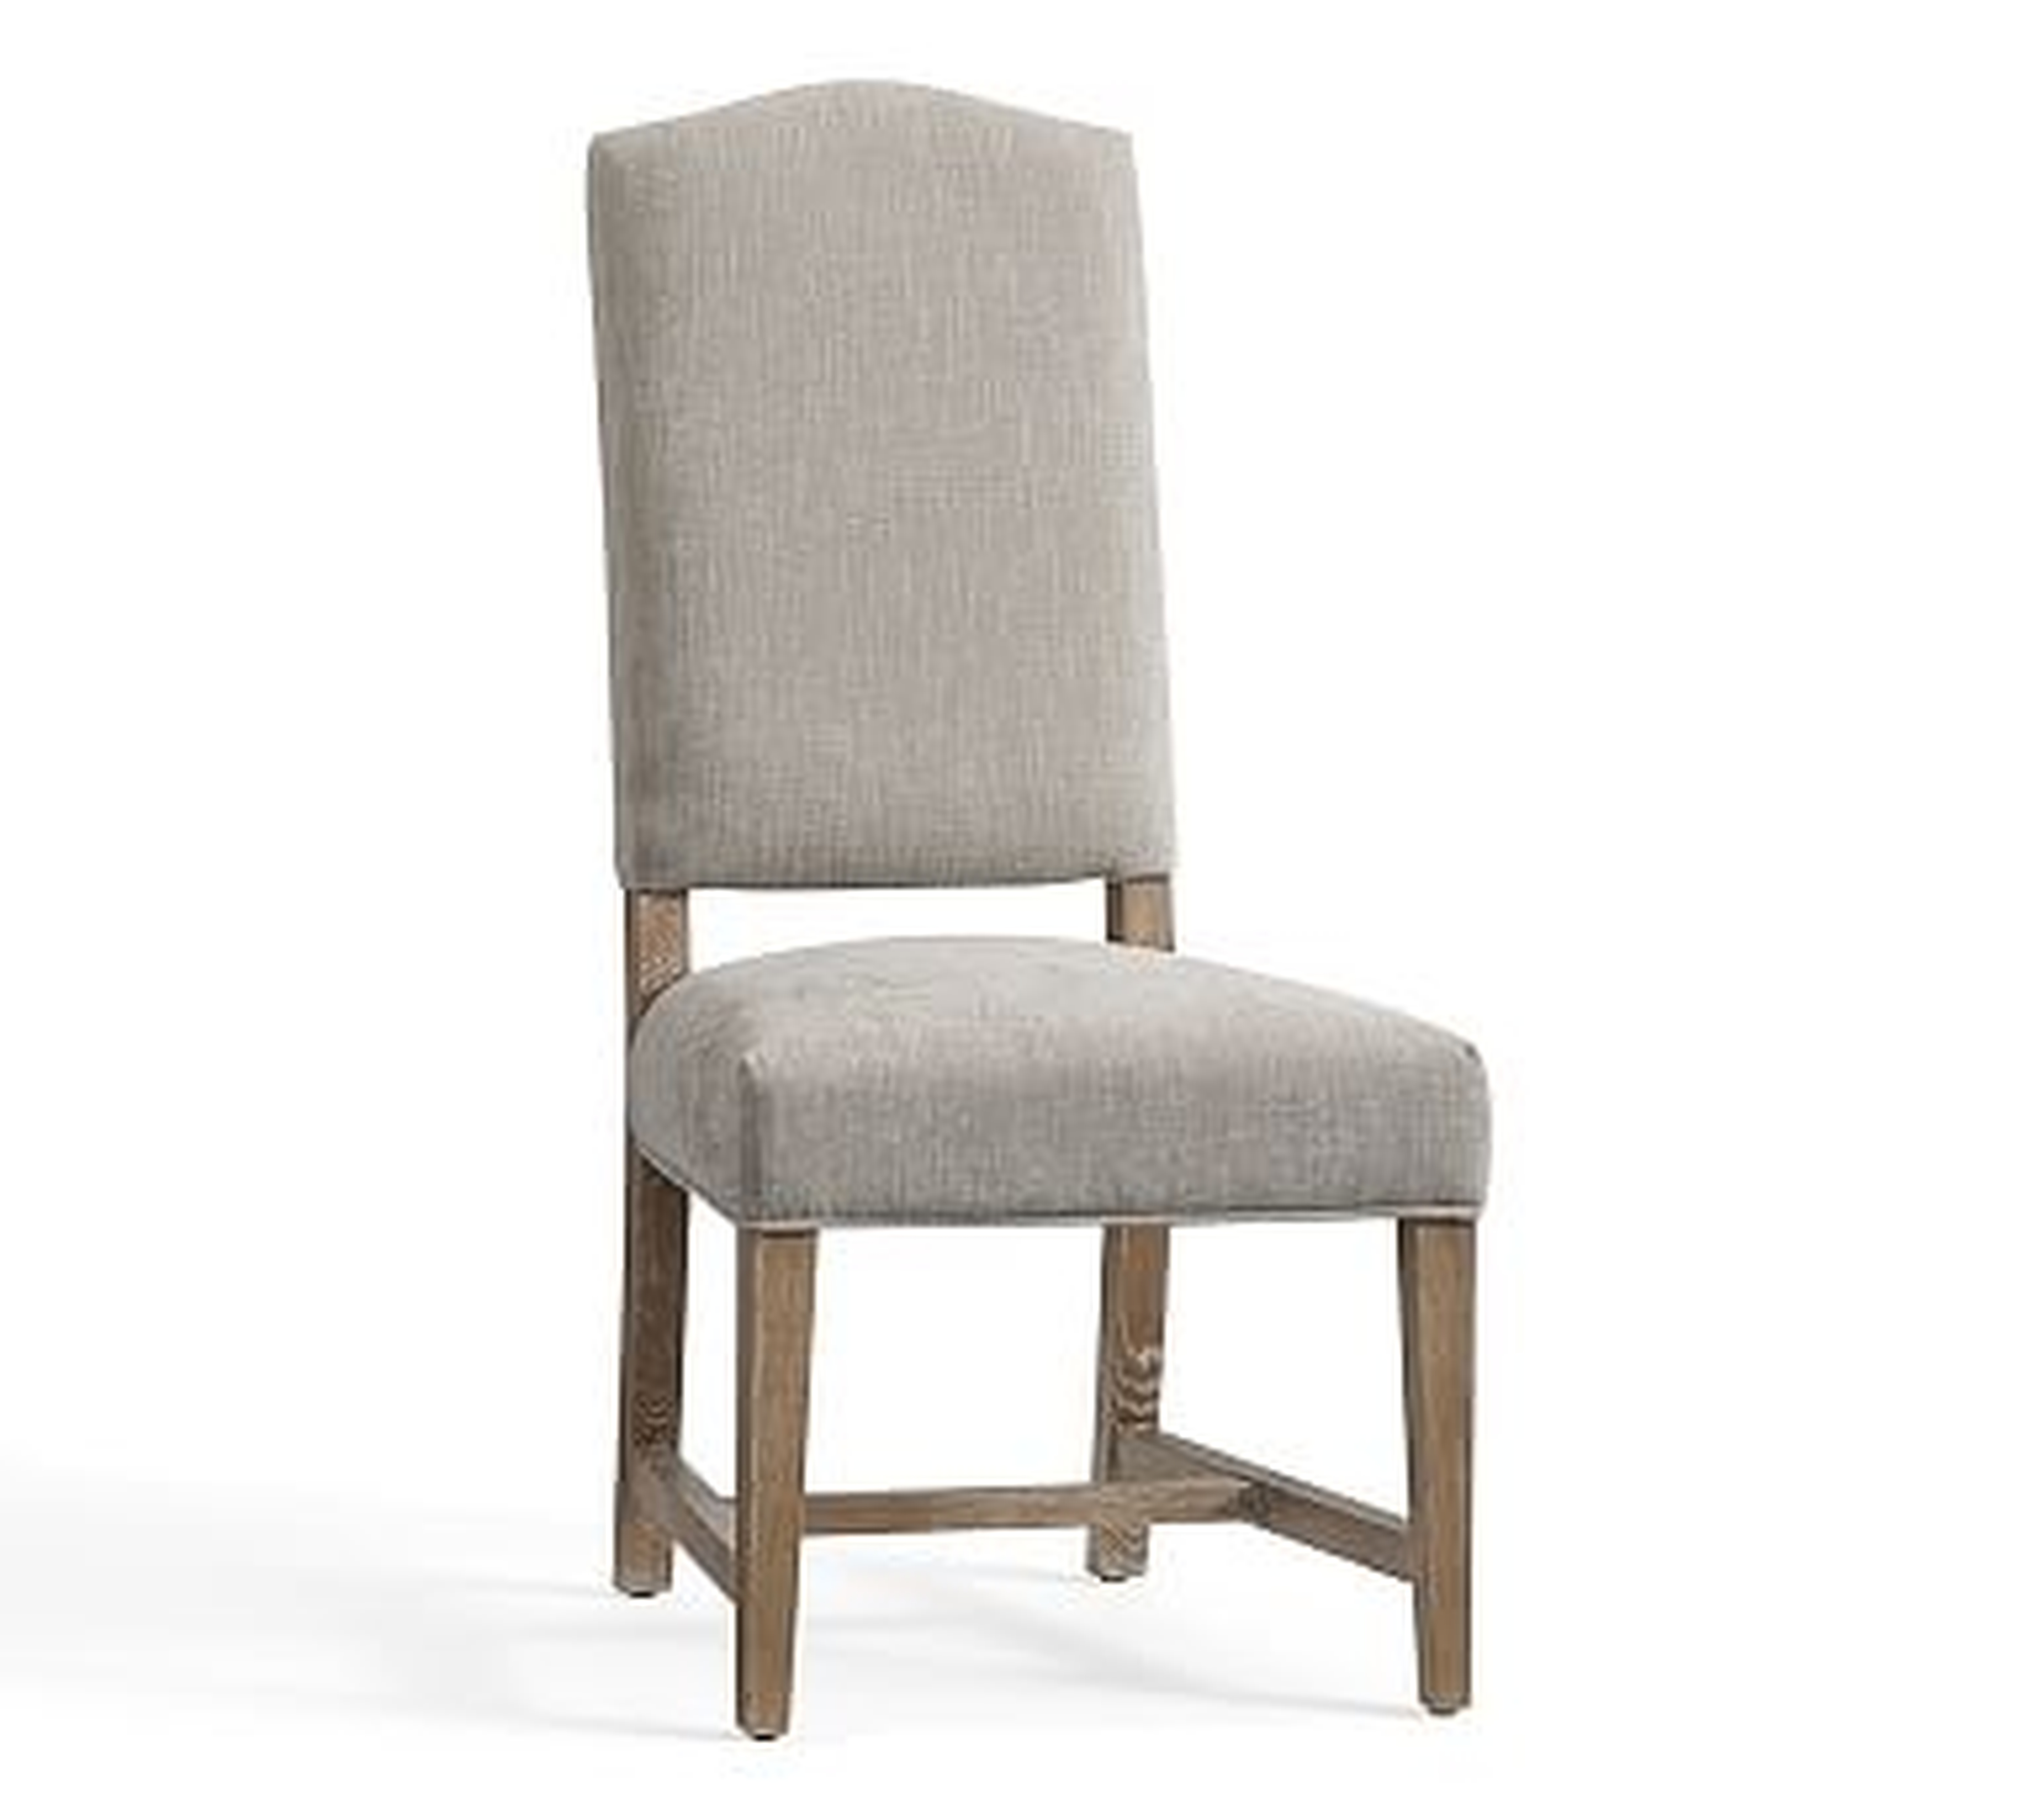 Ashton Non Tufted Dining Chair - Performance Heathered Tweed, Pebble - Pottery Barn